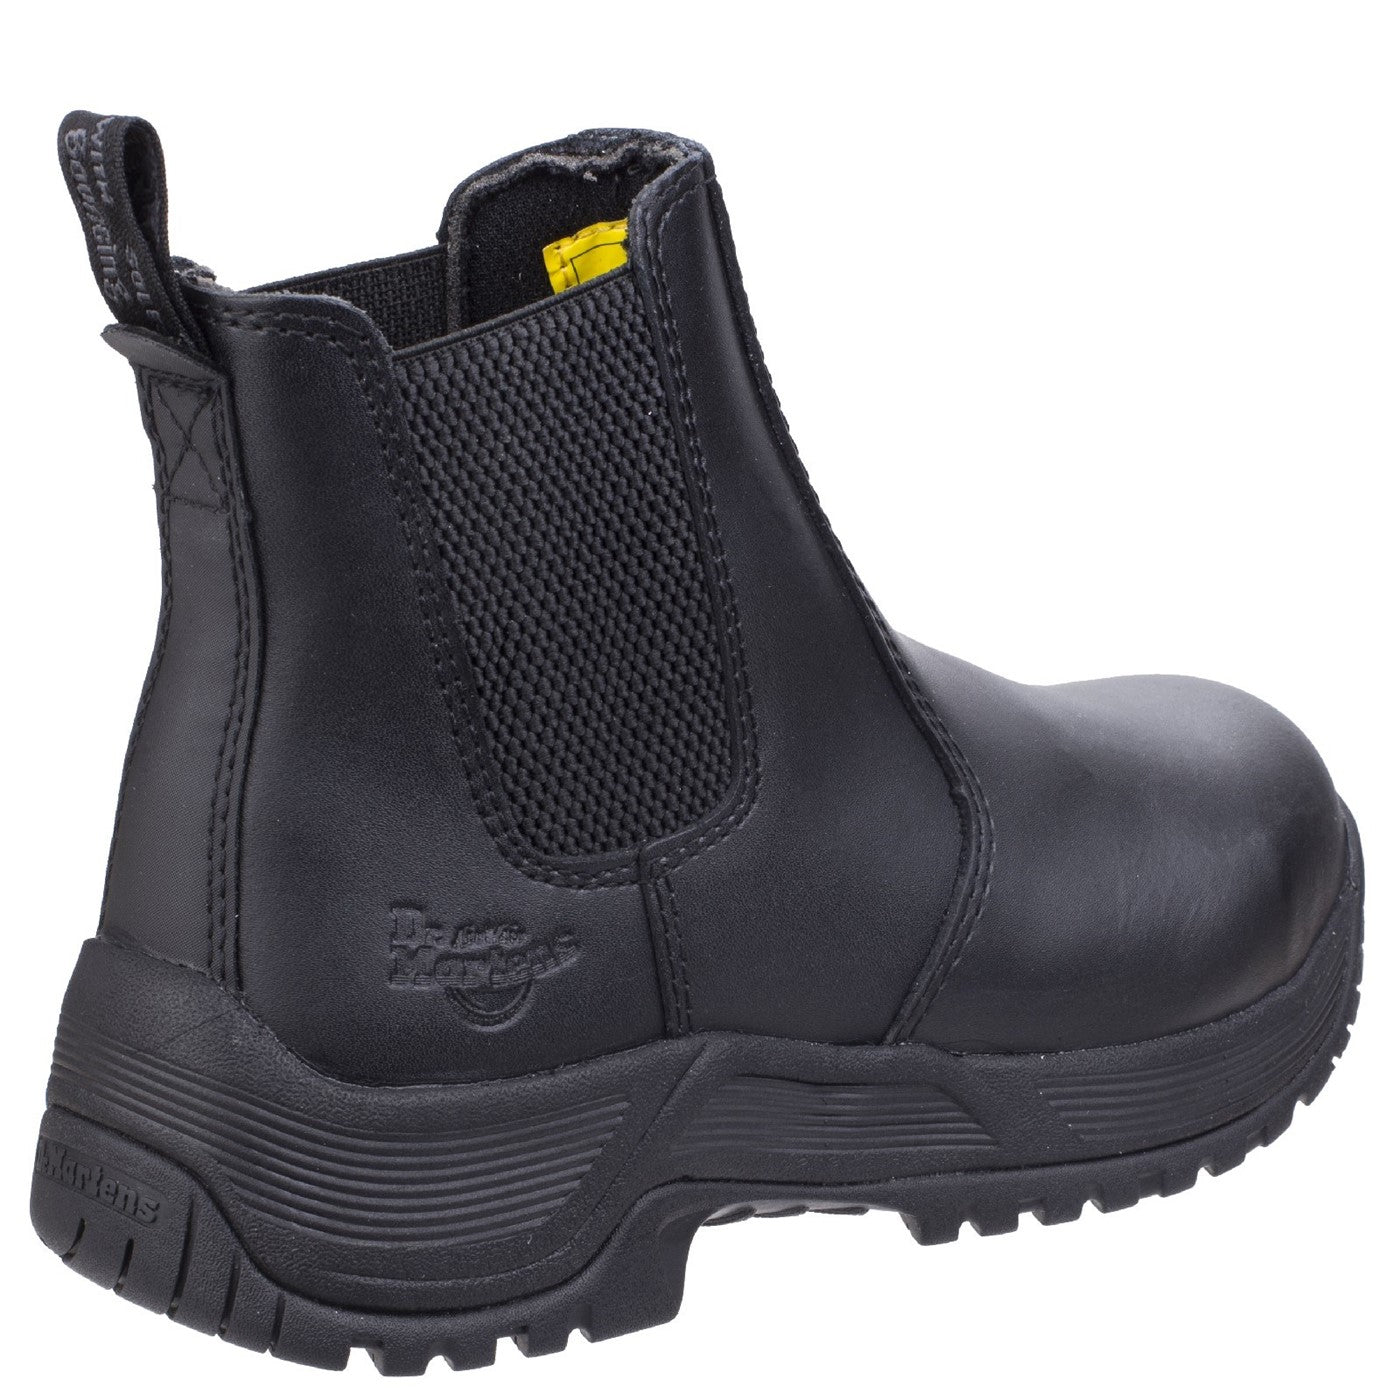 Unisex Dr Martens Drakelow Mens Safety Boot